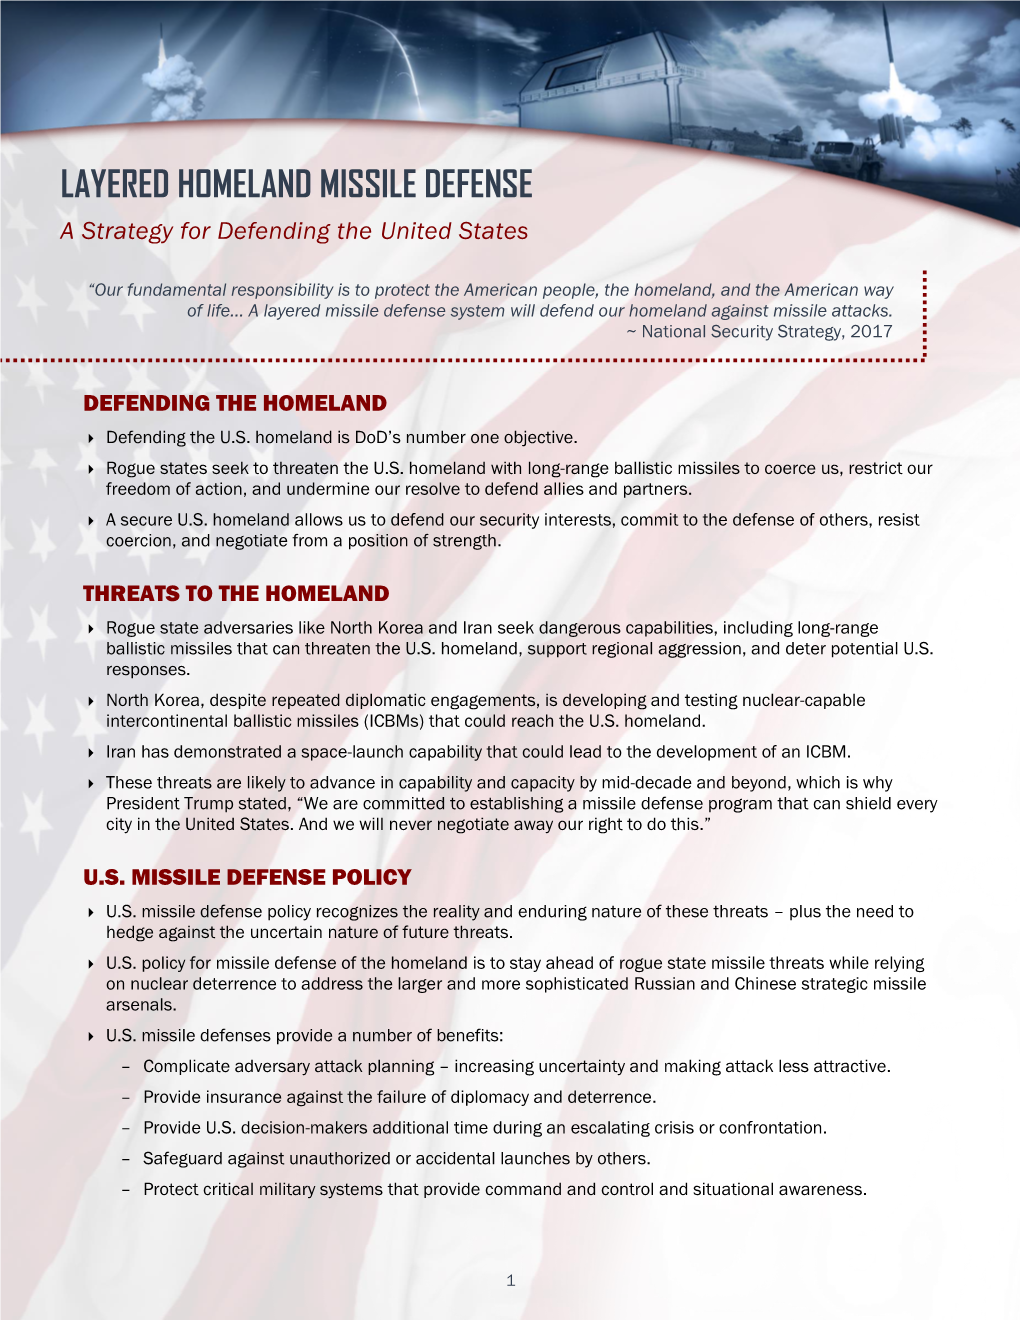 LAYERED HOMELAND MISSILE DEFENSE a Strategy for Defending the United States